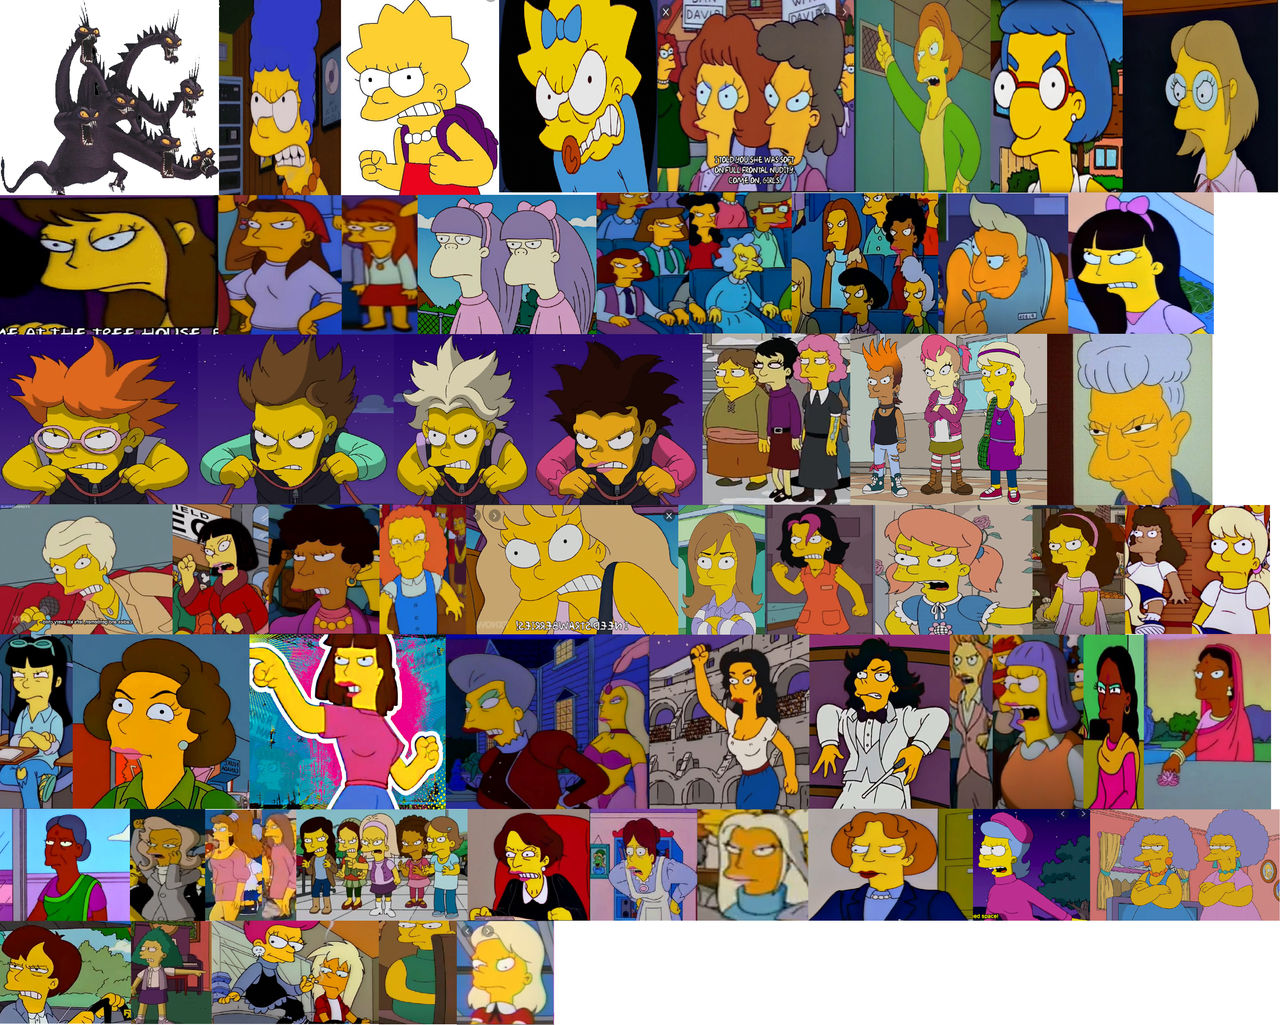 2. Marge Simpson from The Simpsons - wide 4